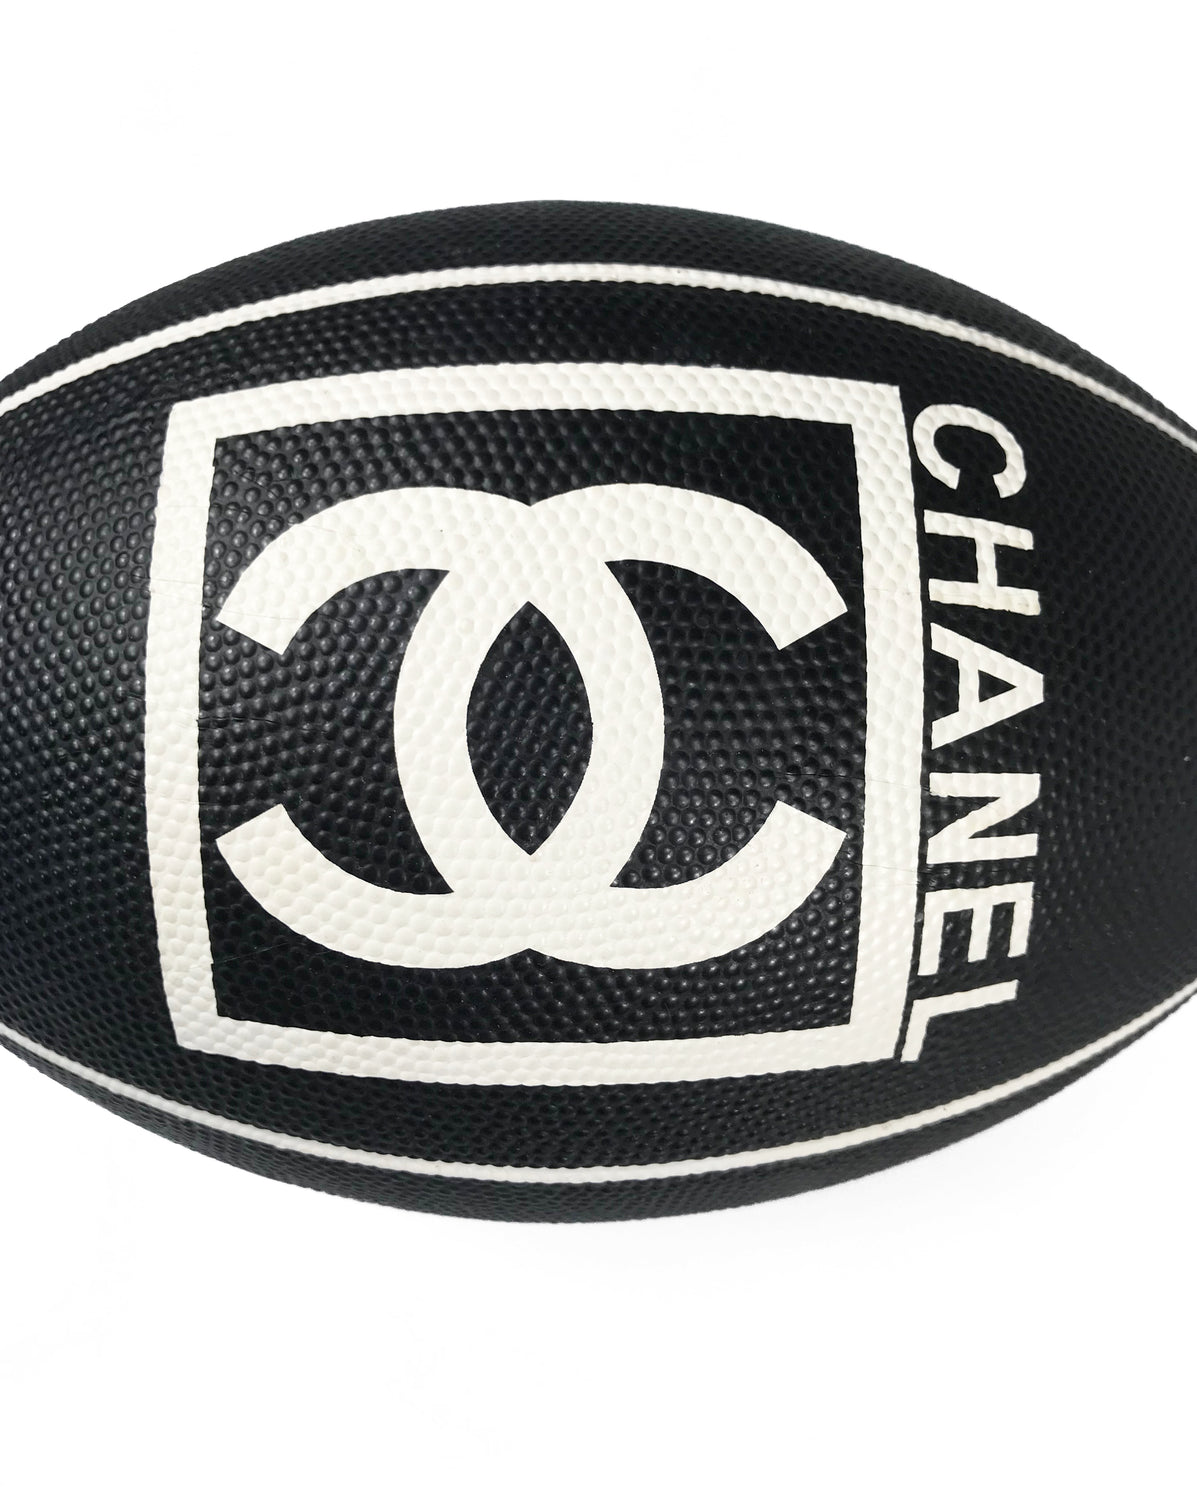 Fruit Vintage rare Chanel 2007 football. This Chanel sport logo foot ball by Karl Lagerfeld is an important Chanel collectors accessory. It features a large Chanel logo and text in black and white